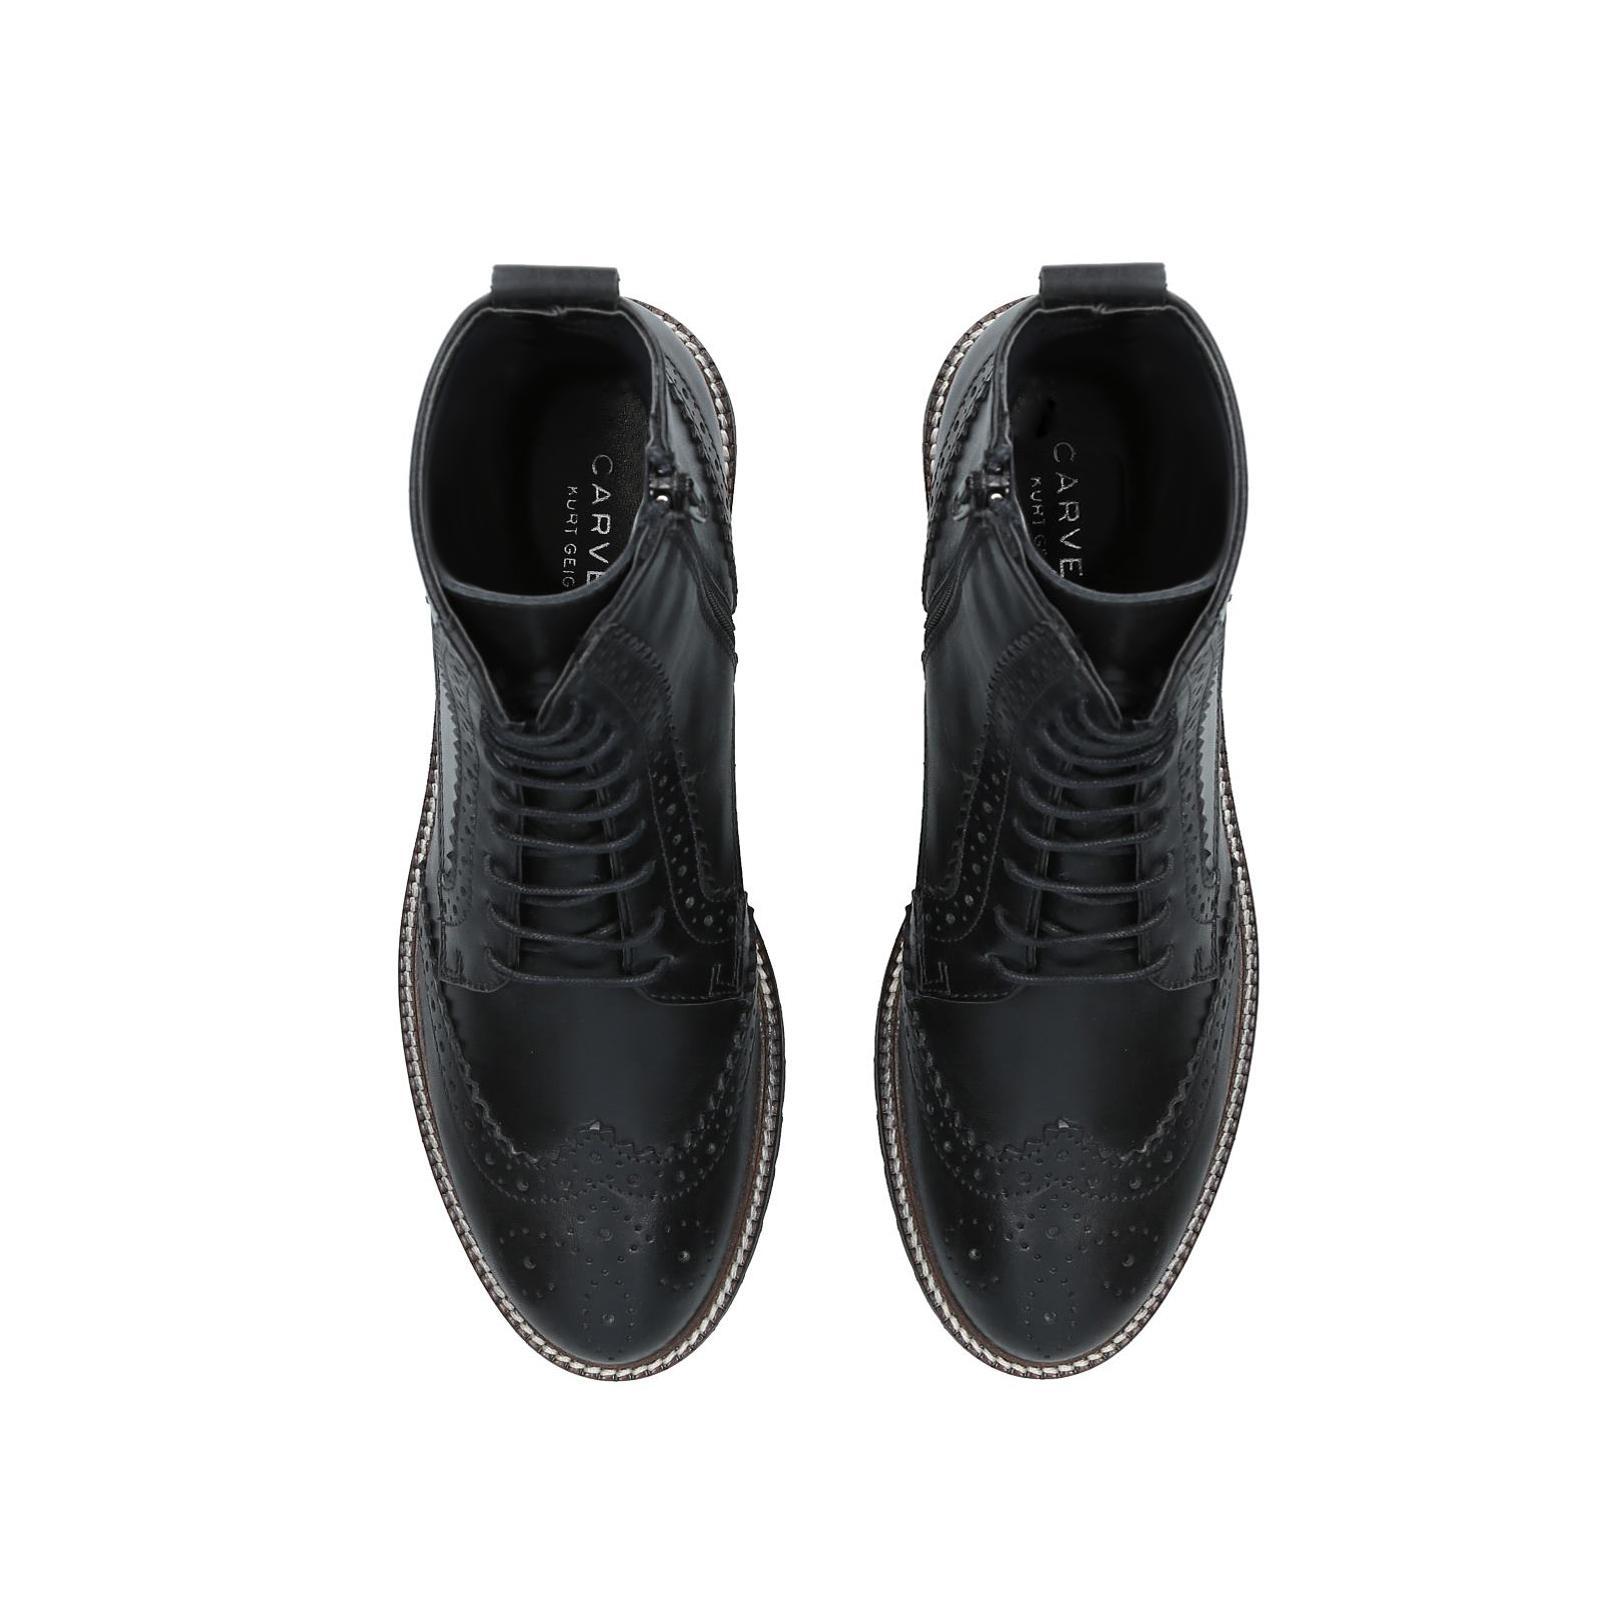 SNAIL Black Leather Flat Brogue Hiker Boots by CARVELA